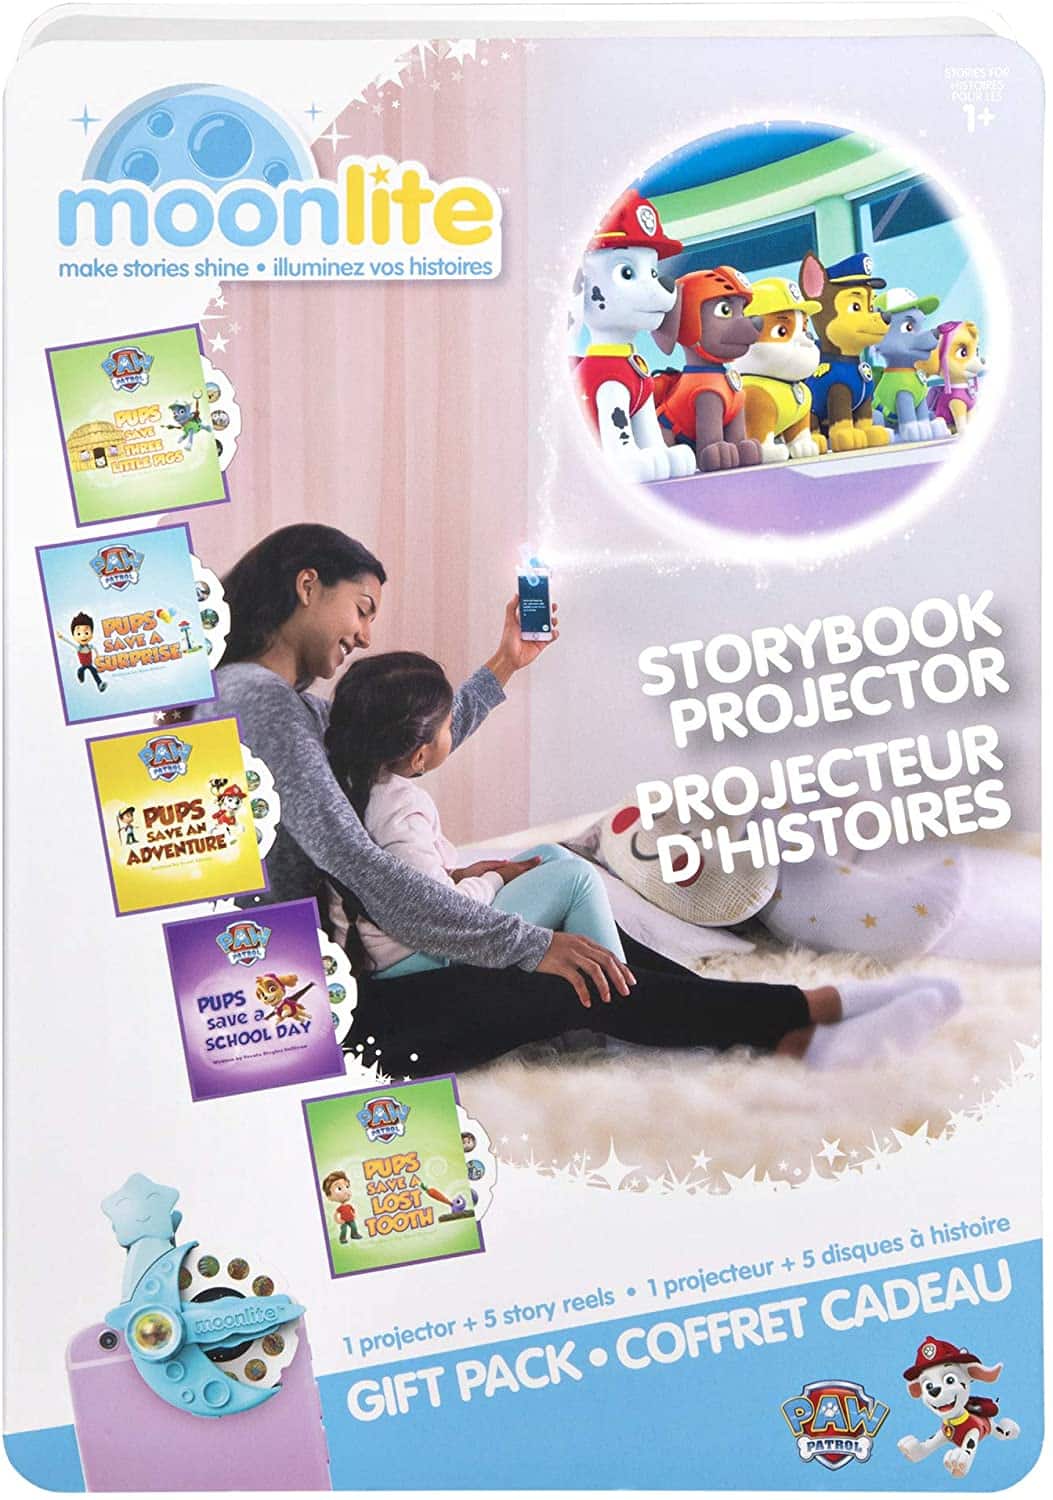 DEAL ALERT: WOW!! 79% off Storybook Projector for Smartphones and 5 Story Reels